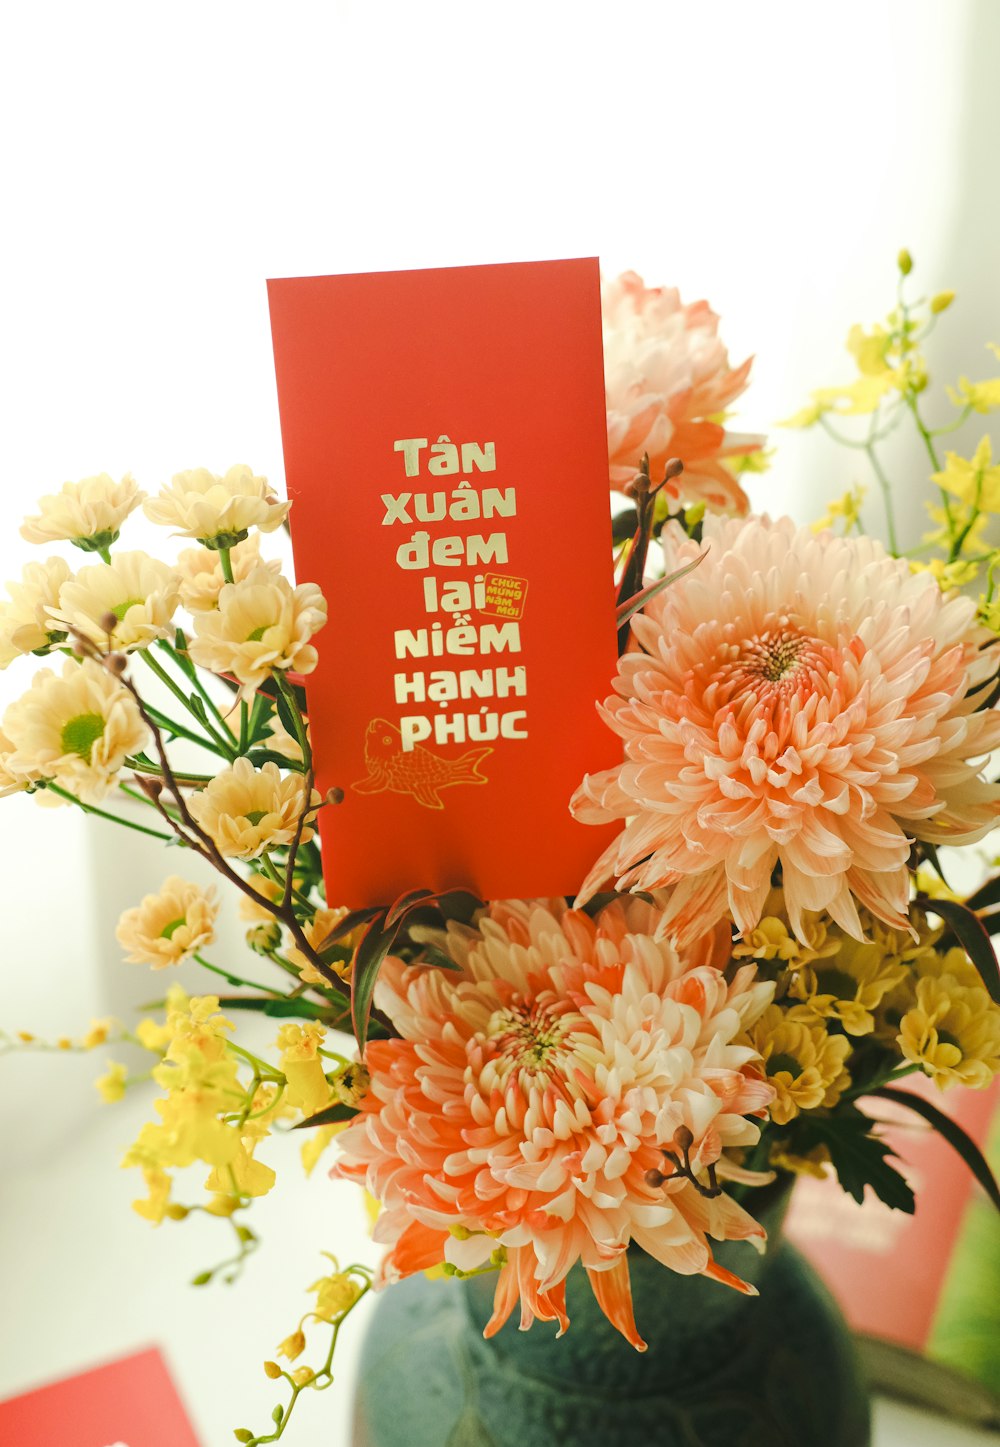 a vase filled with flowers and a red card